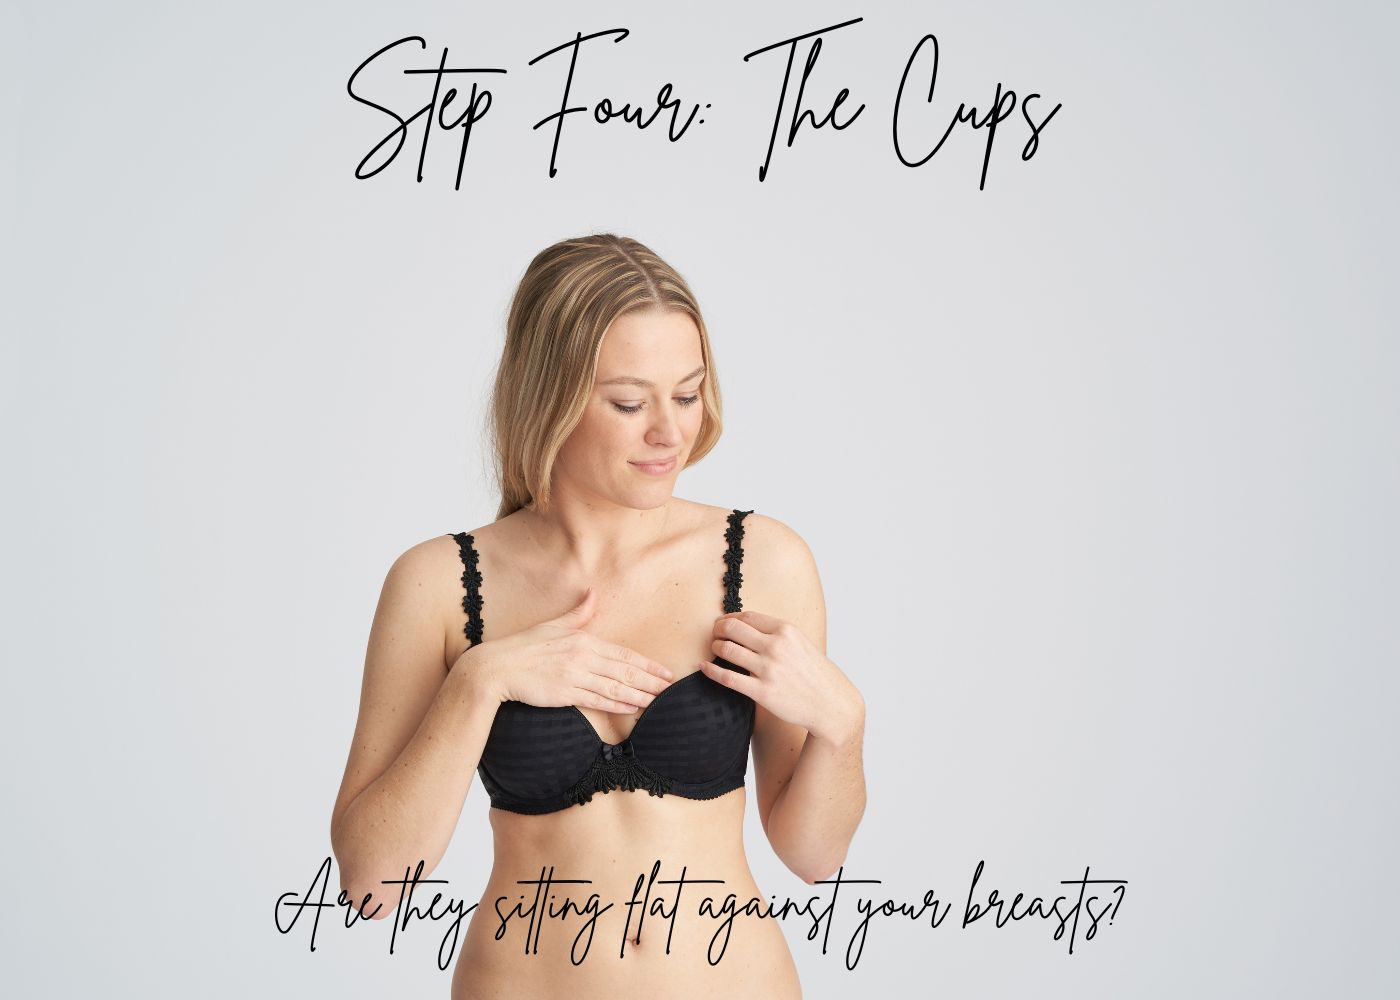 How to check if you're wearing the wrong bra size